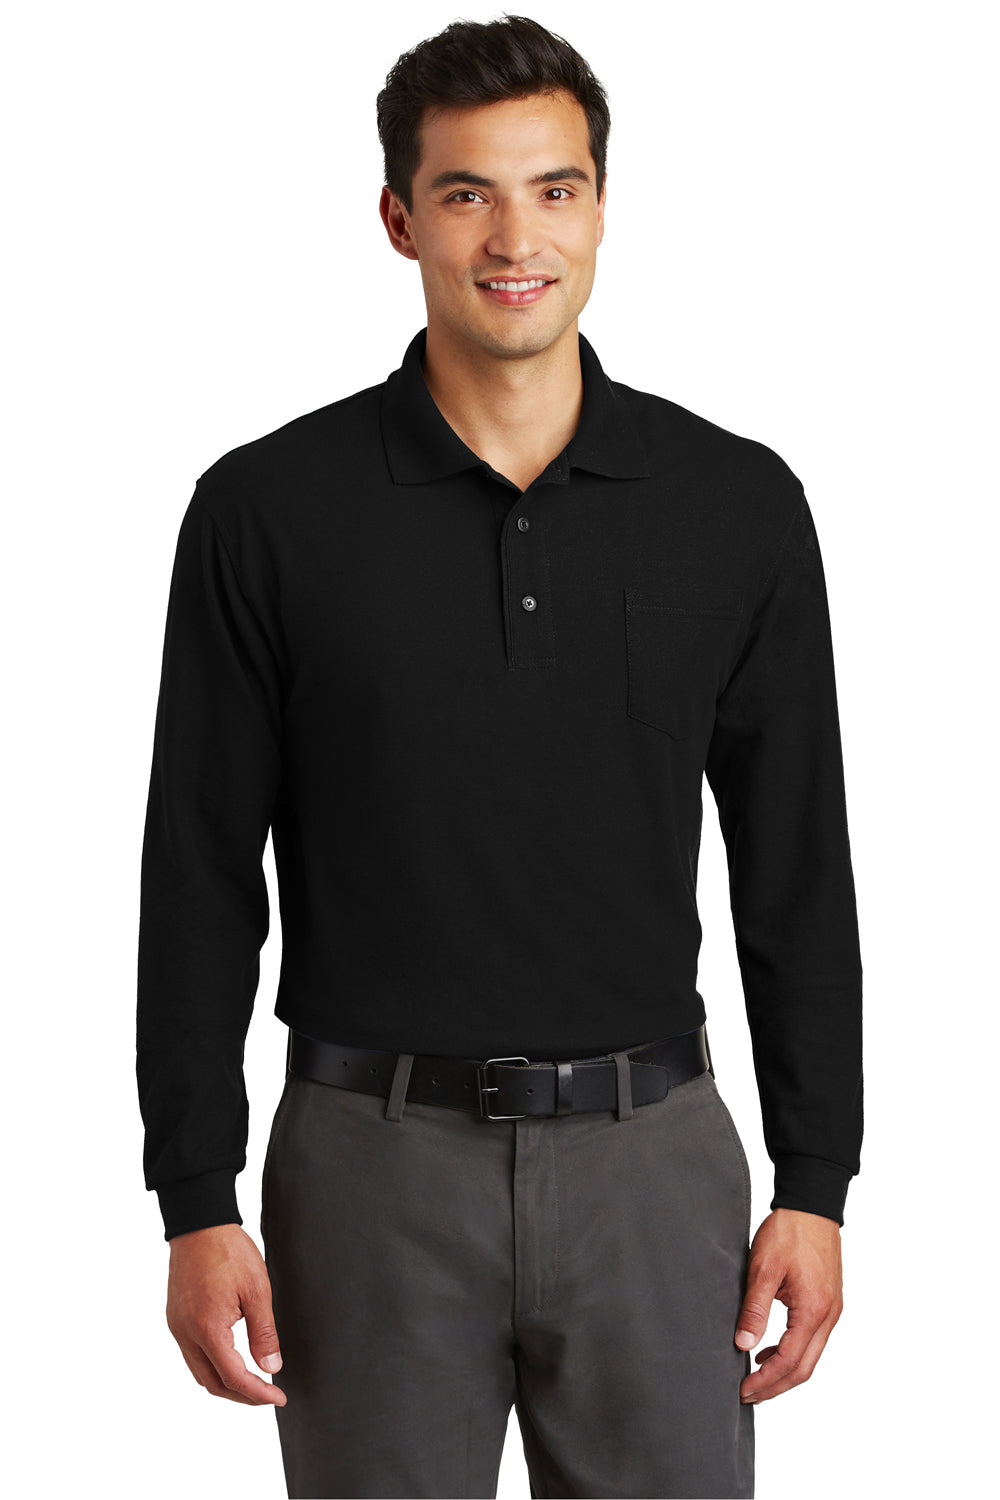 Port Authority K500LSP Mens Silk Touch Wrinkle Resistant Long Sleeve Polo Shirt w/ Pocket Black Front